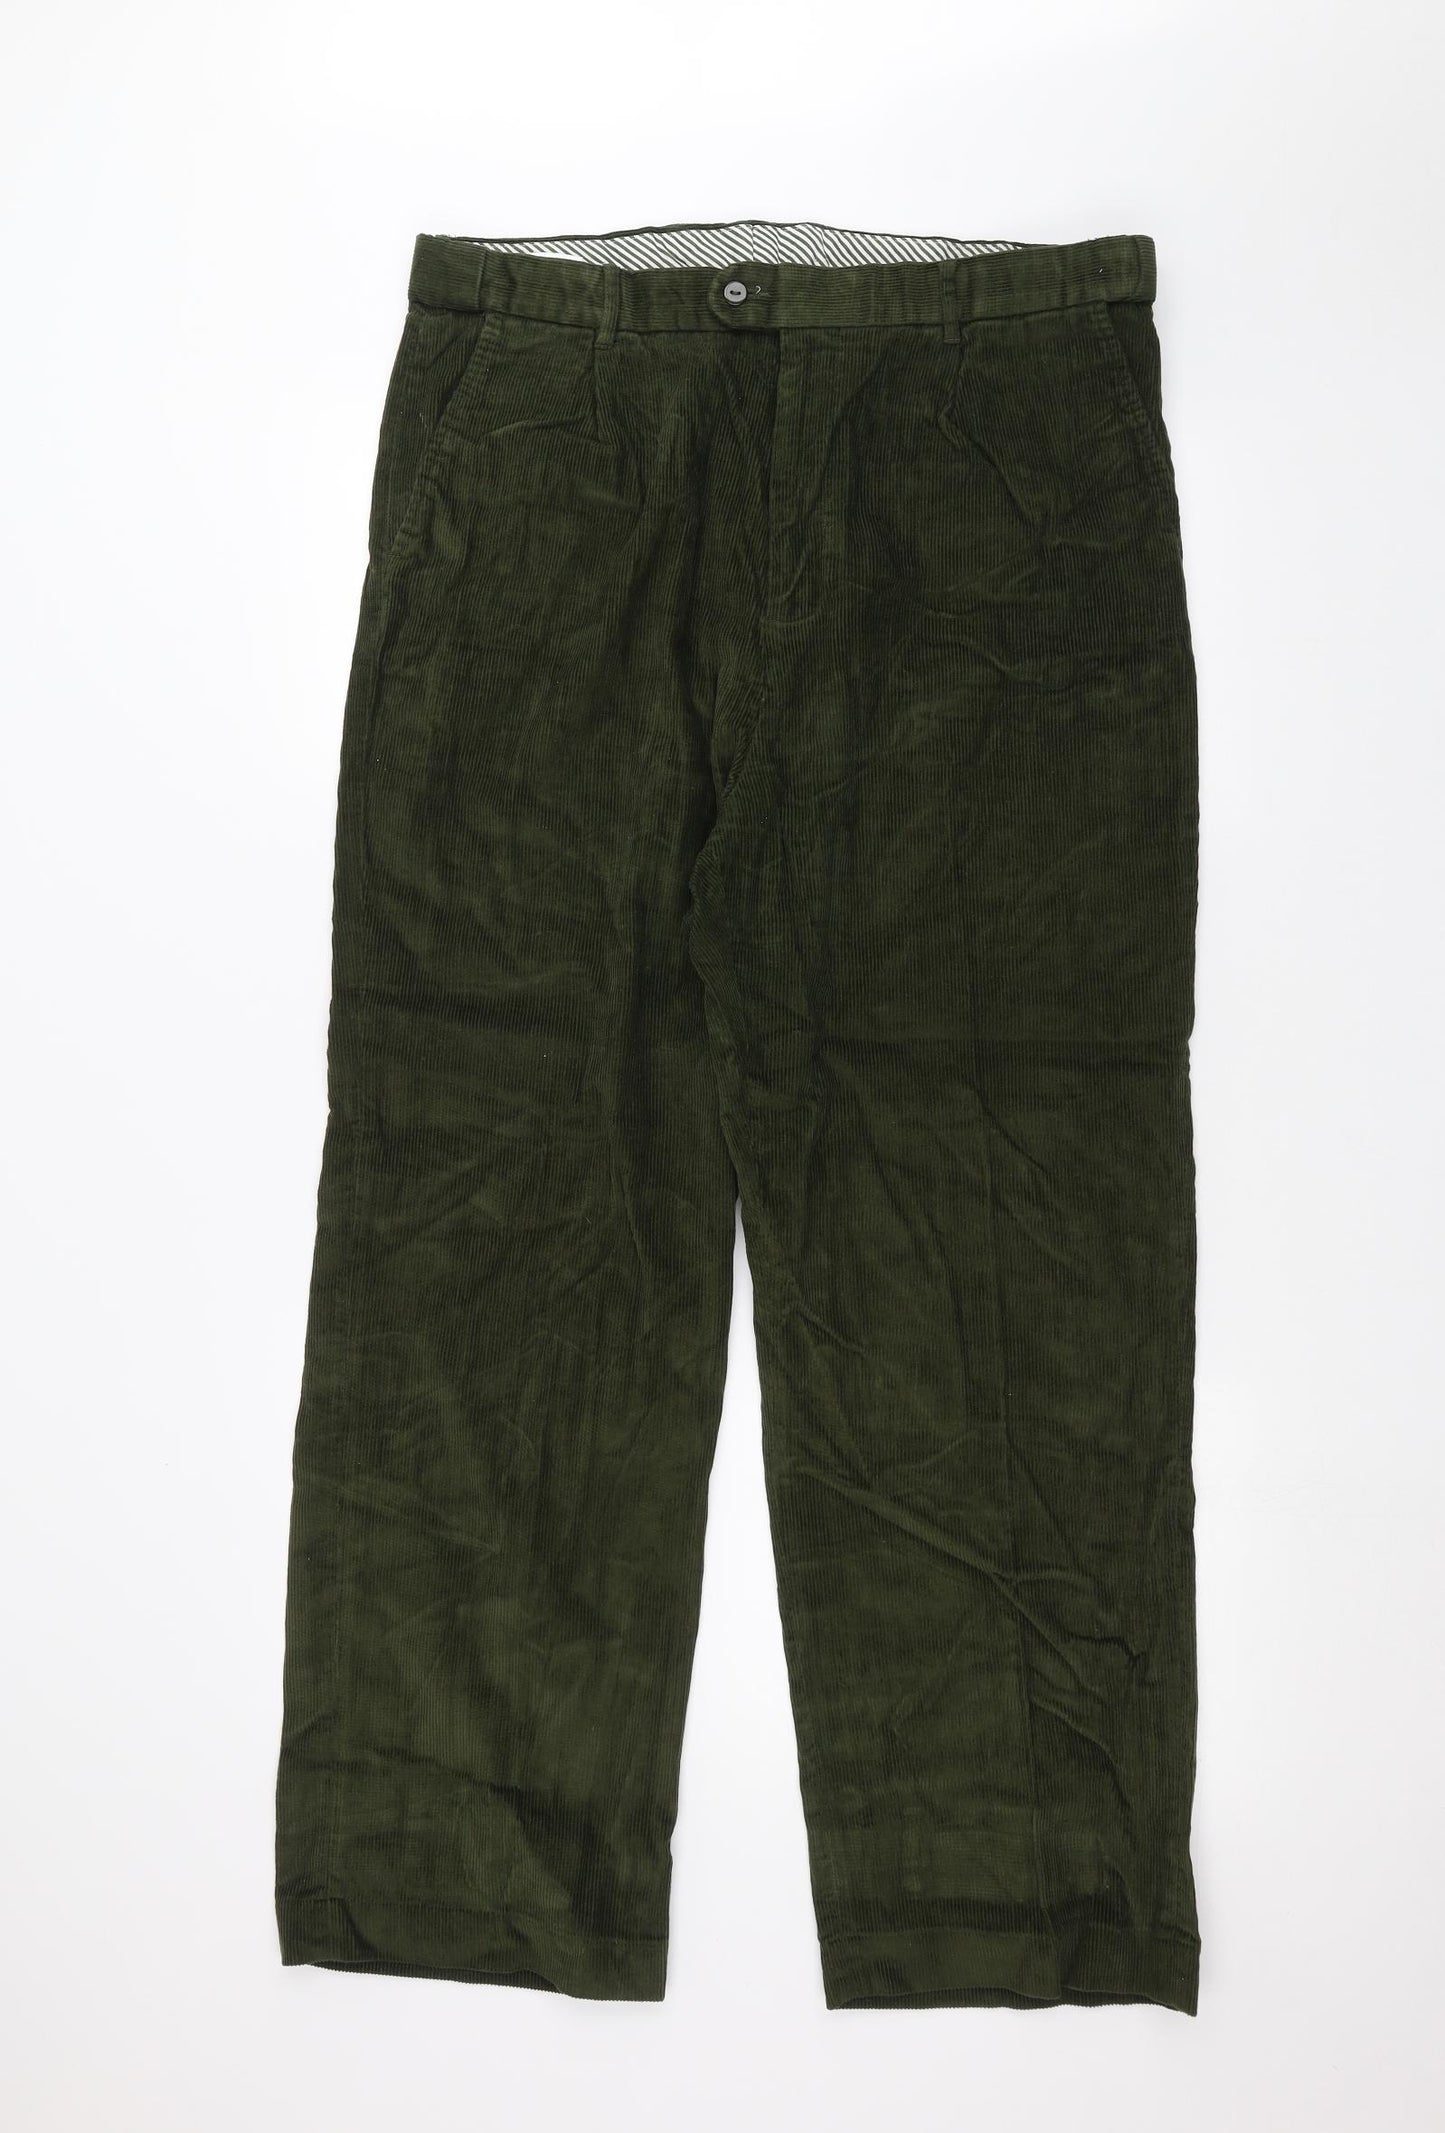 Clifford James Mens Green   Straight Jeans Size 36 in L30 in